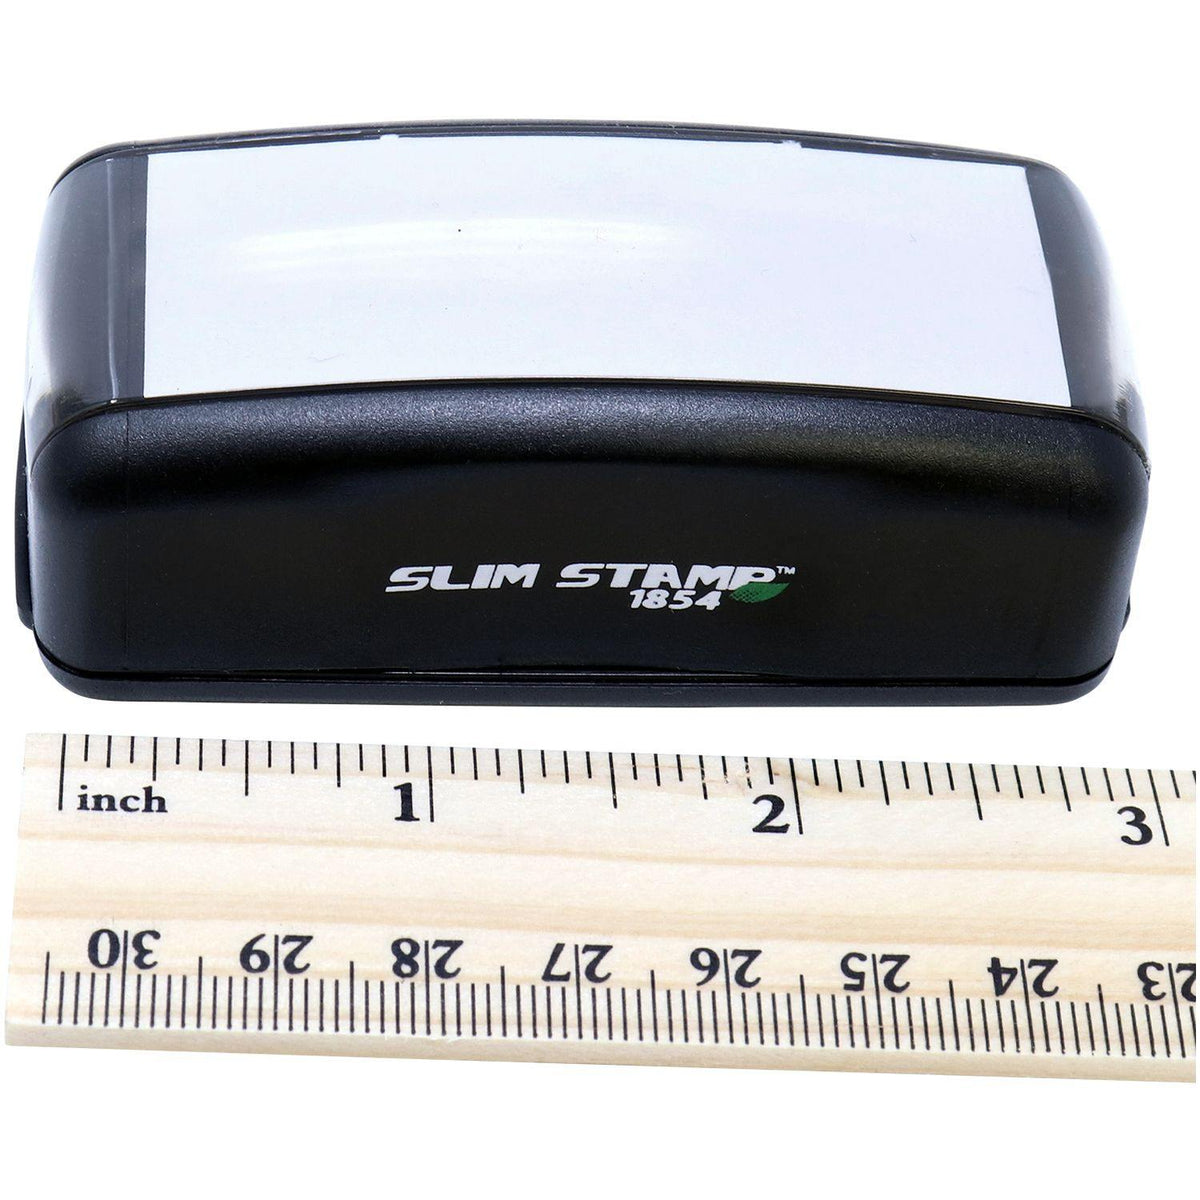 Measurement Large Pre-Inked Social Distancing 6 Feet Stamp with Ruler